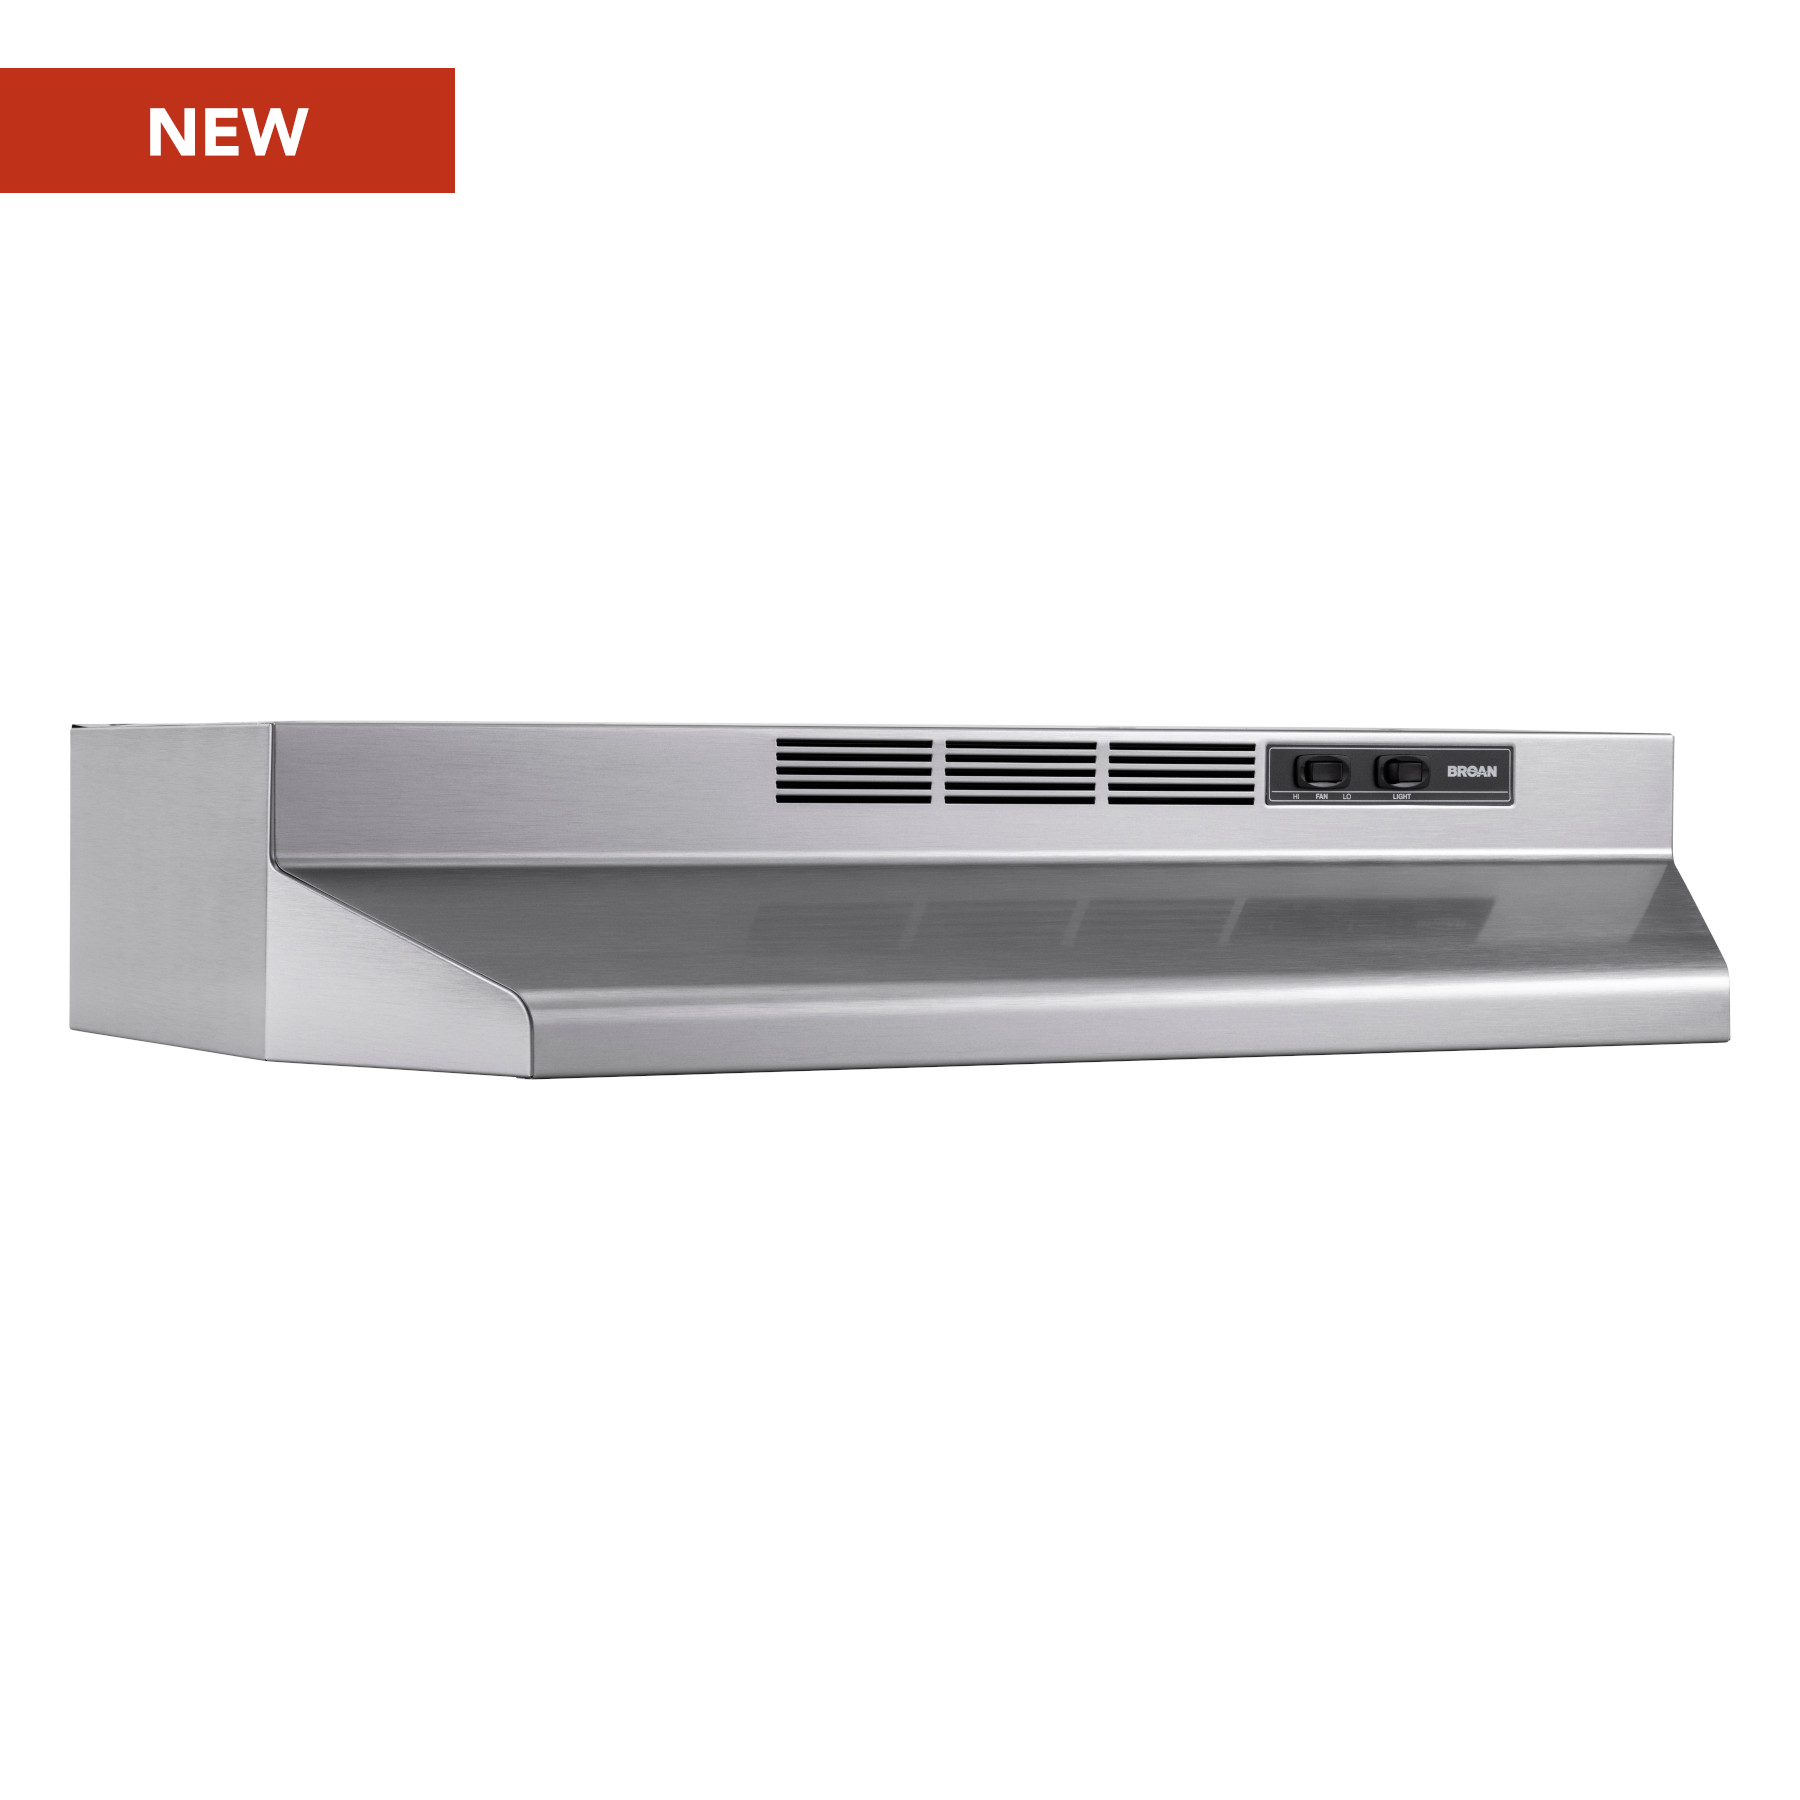 Broan® 24-Inch Ductless Under-Cabinet Range Hood, Stainless Finish